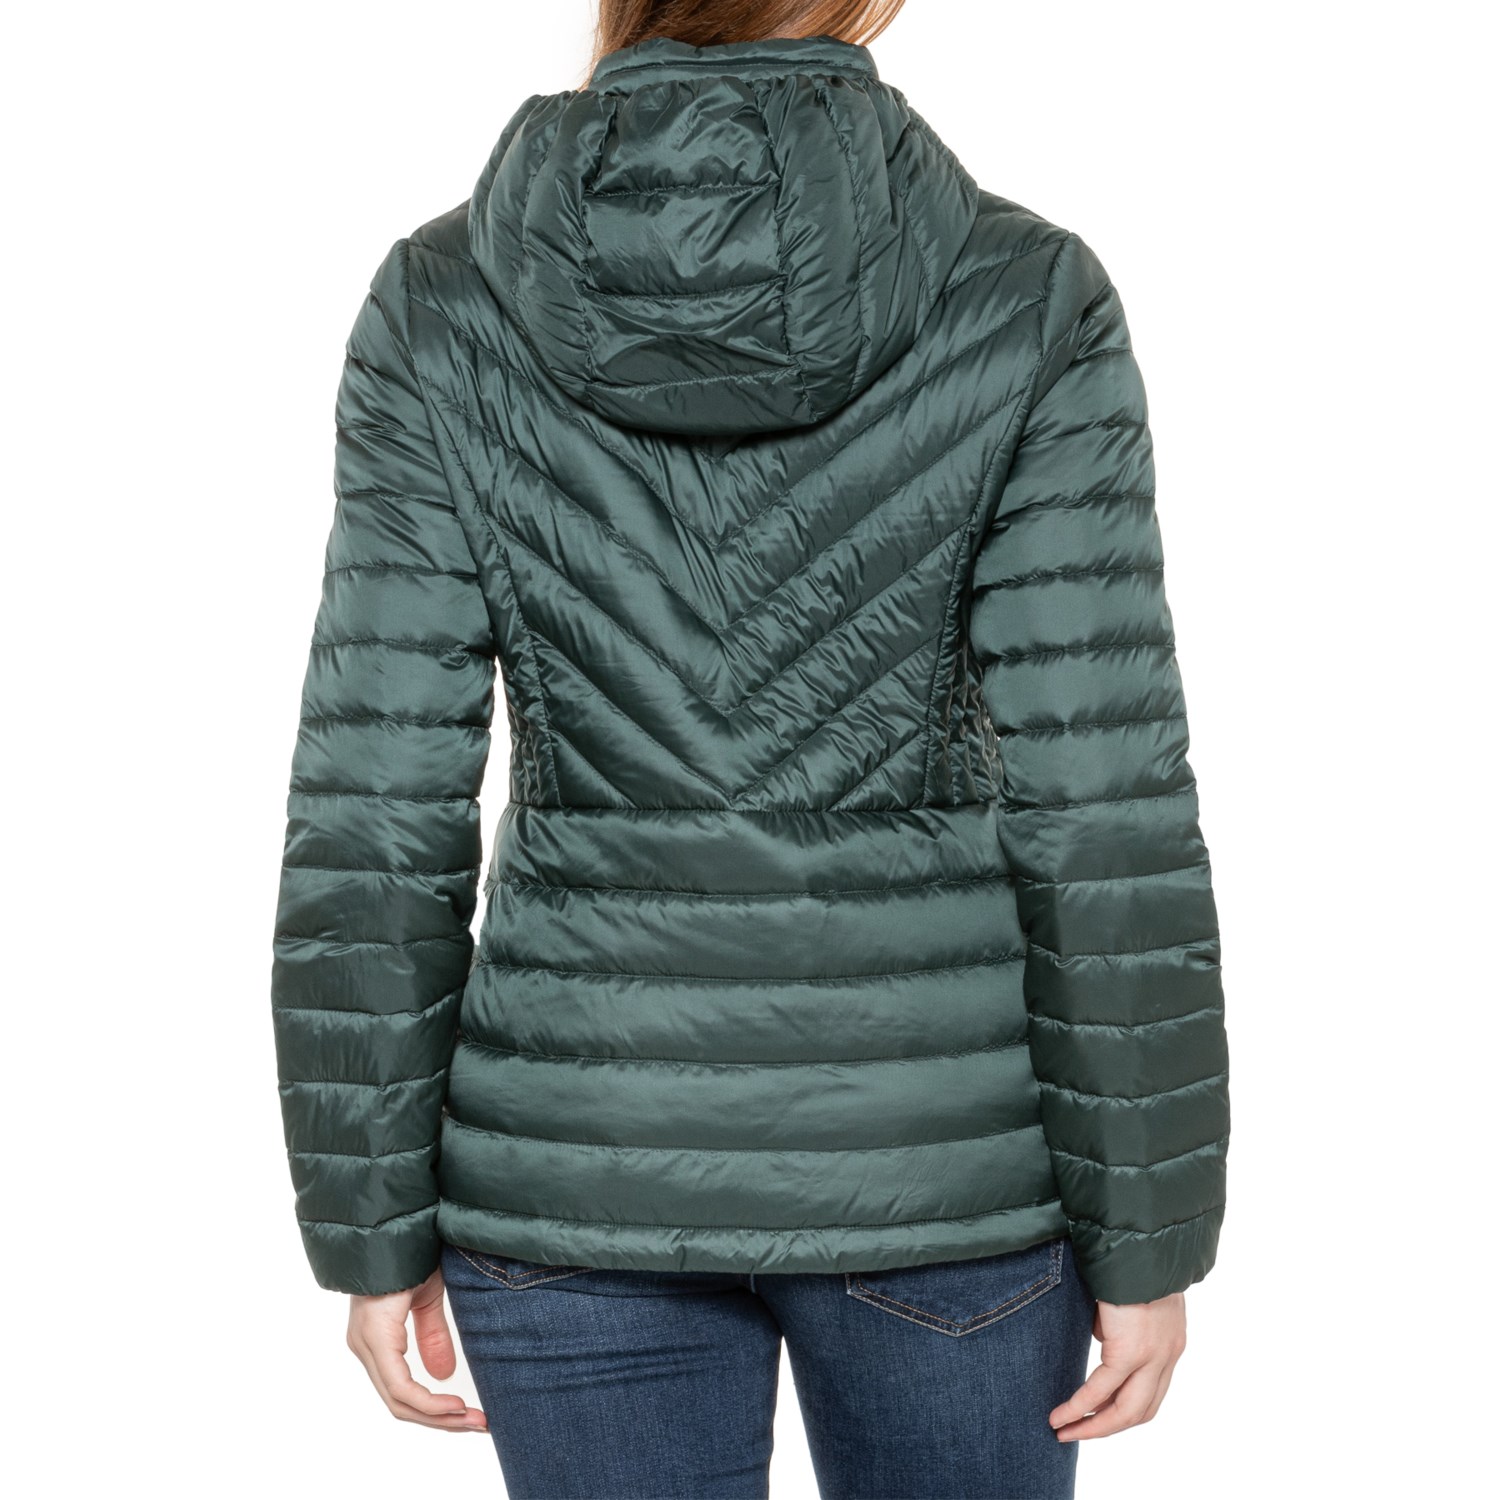 32 Degrees Short Quilted Packable Down Jacket - Save 53%